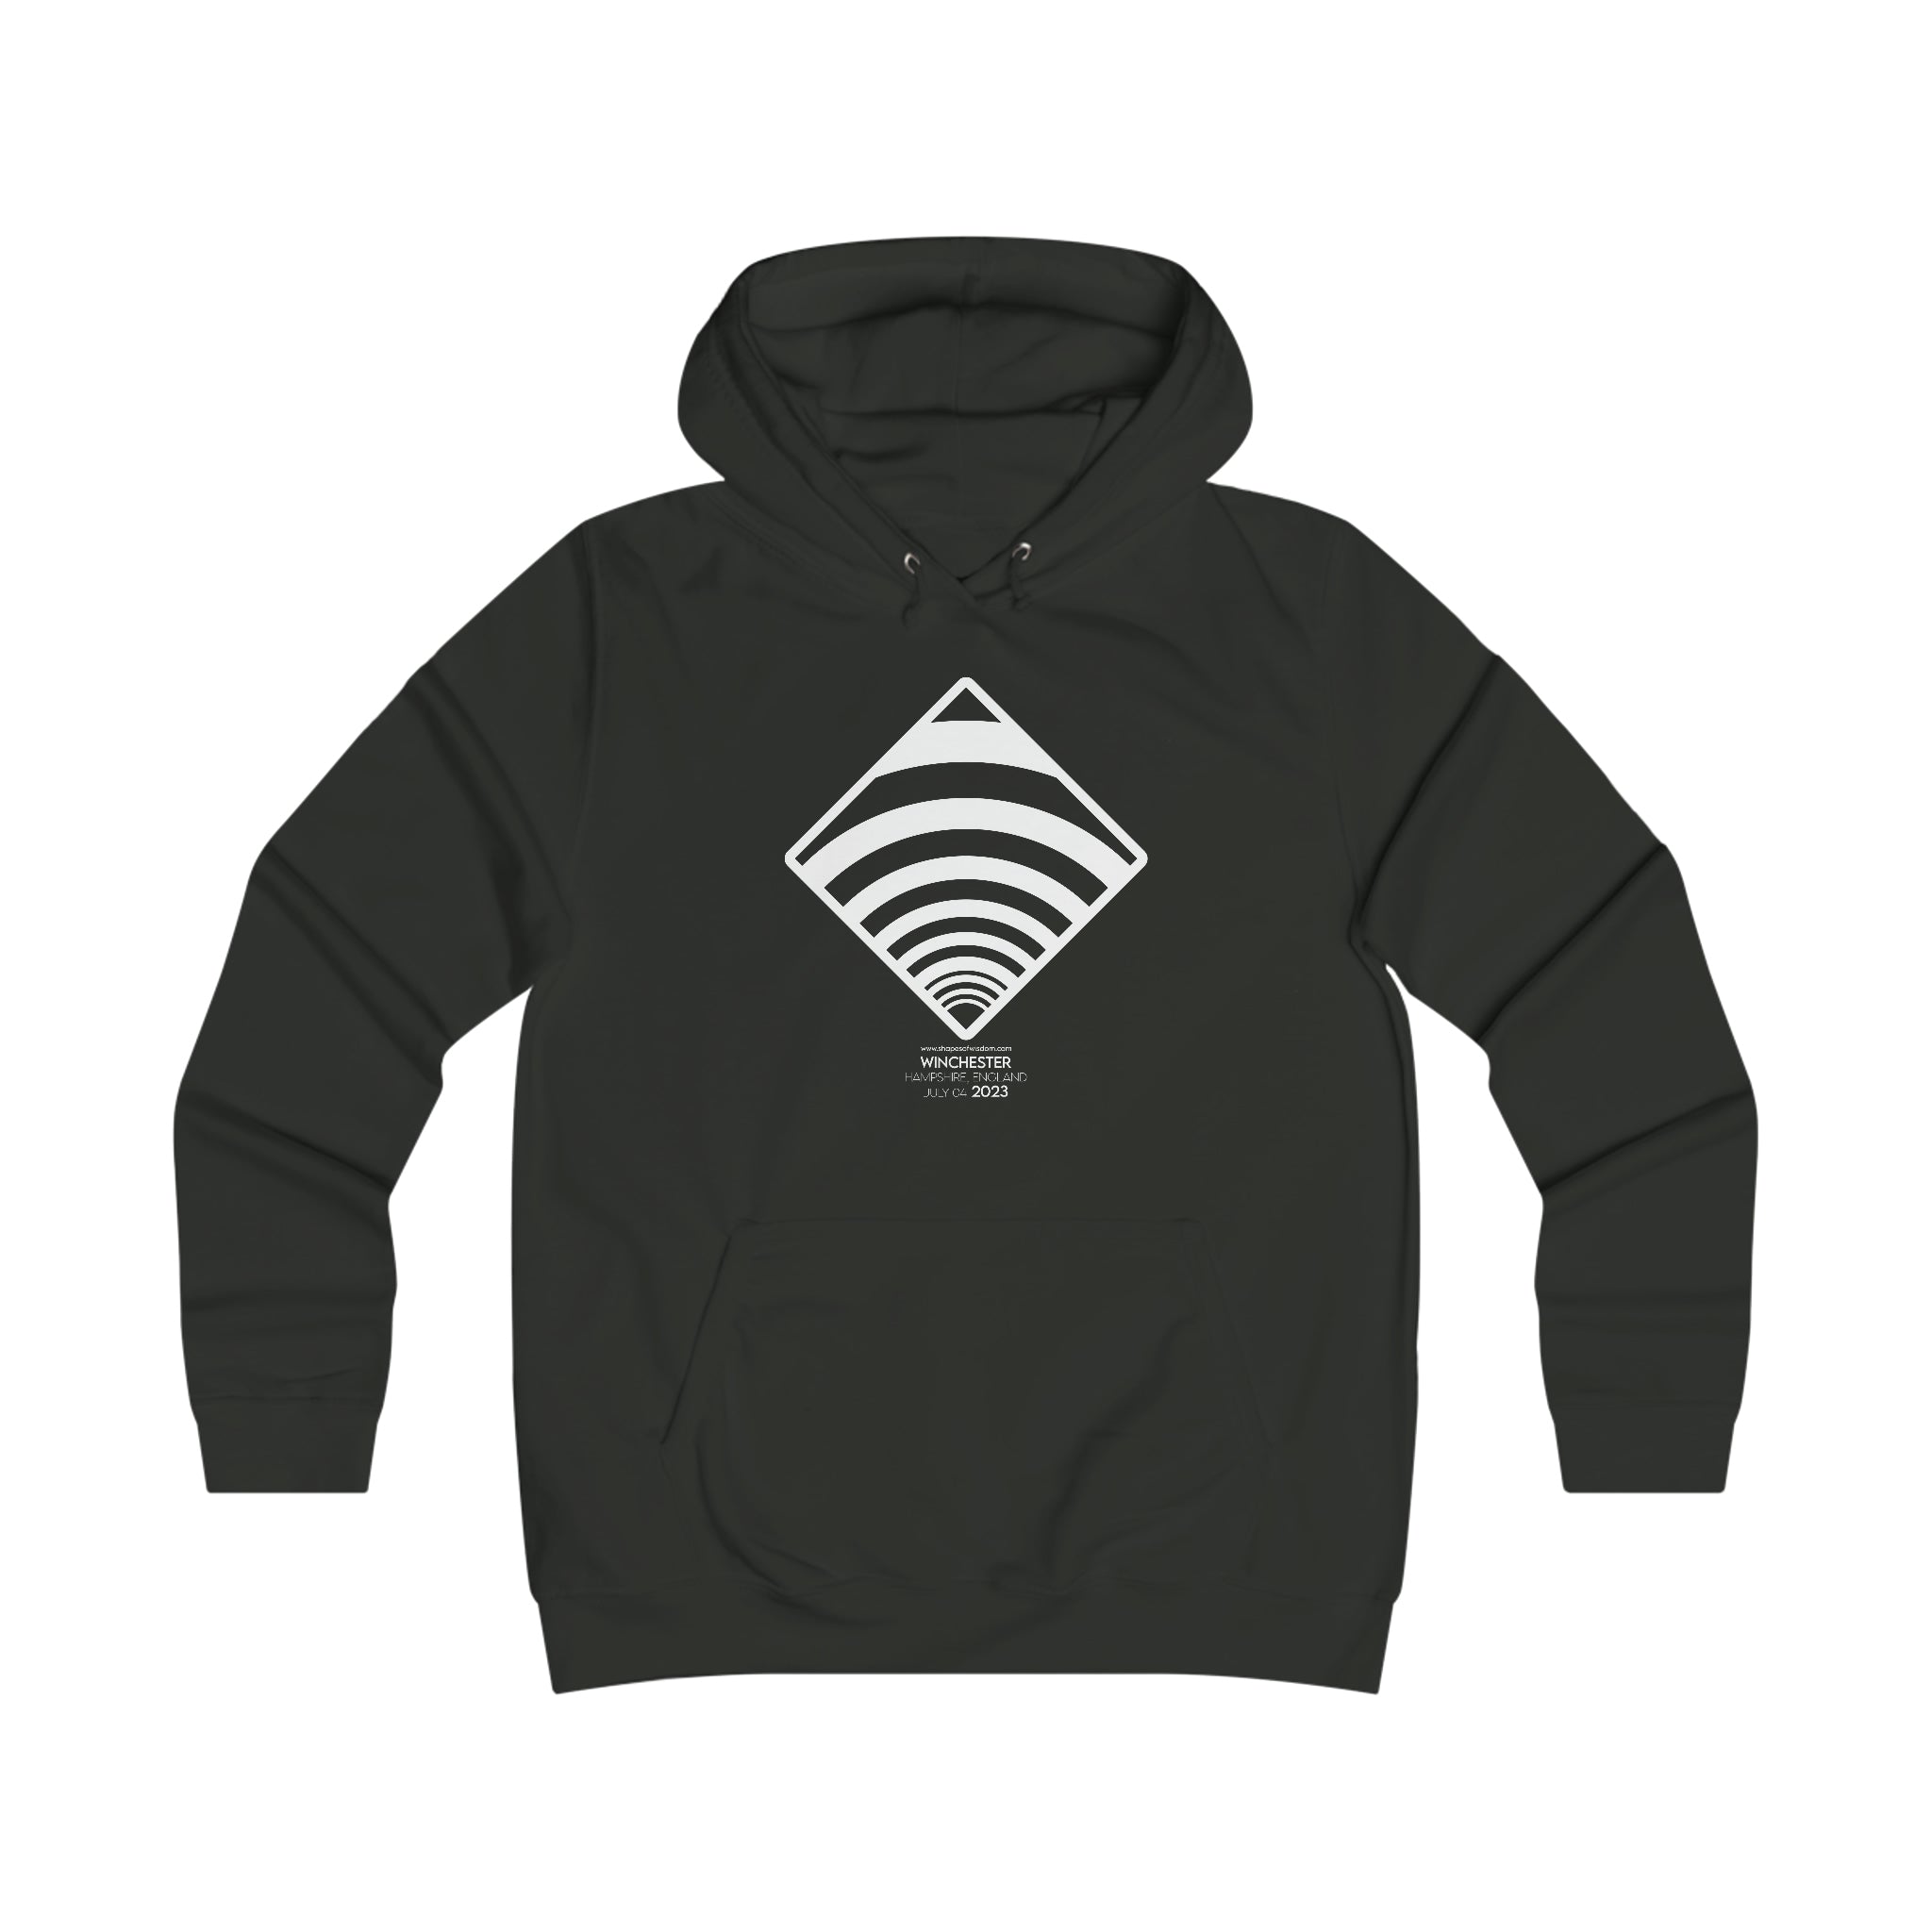 Crop Circle Girl College Hoodie - Winchester 4